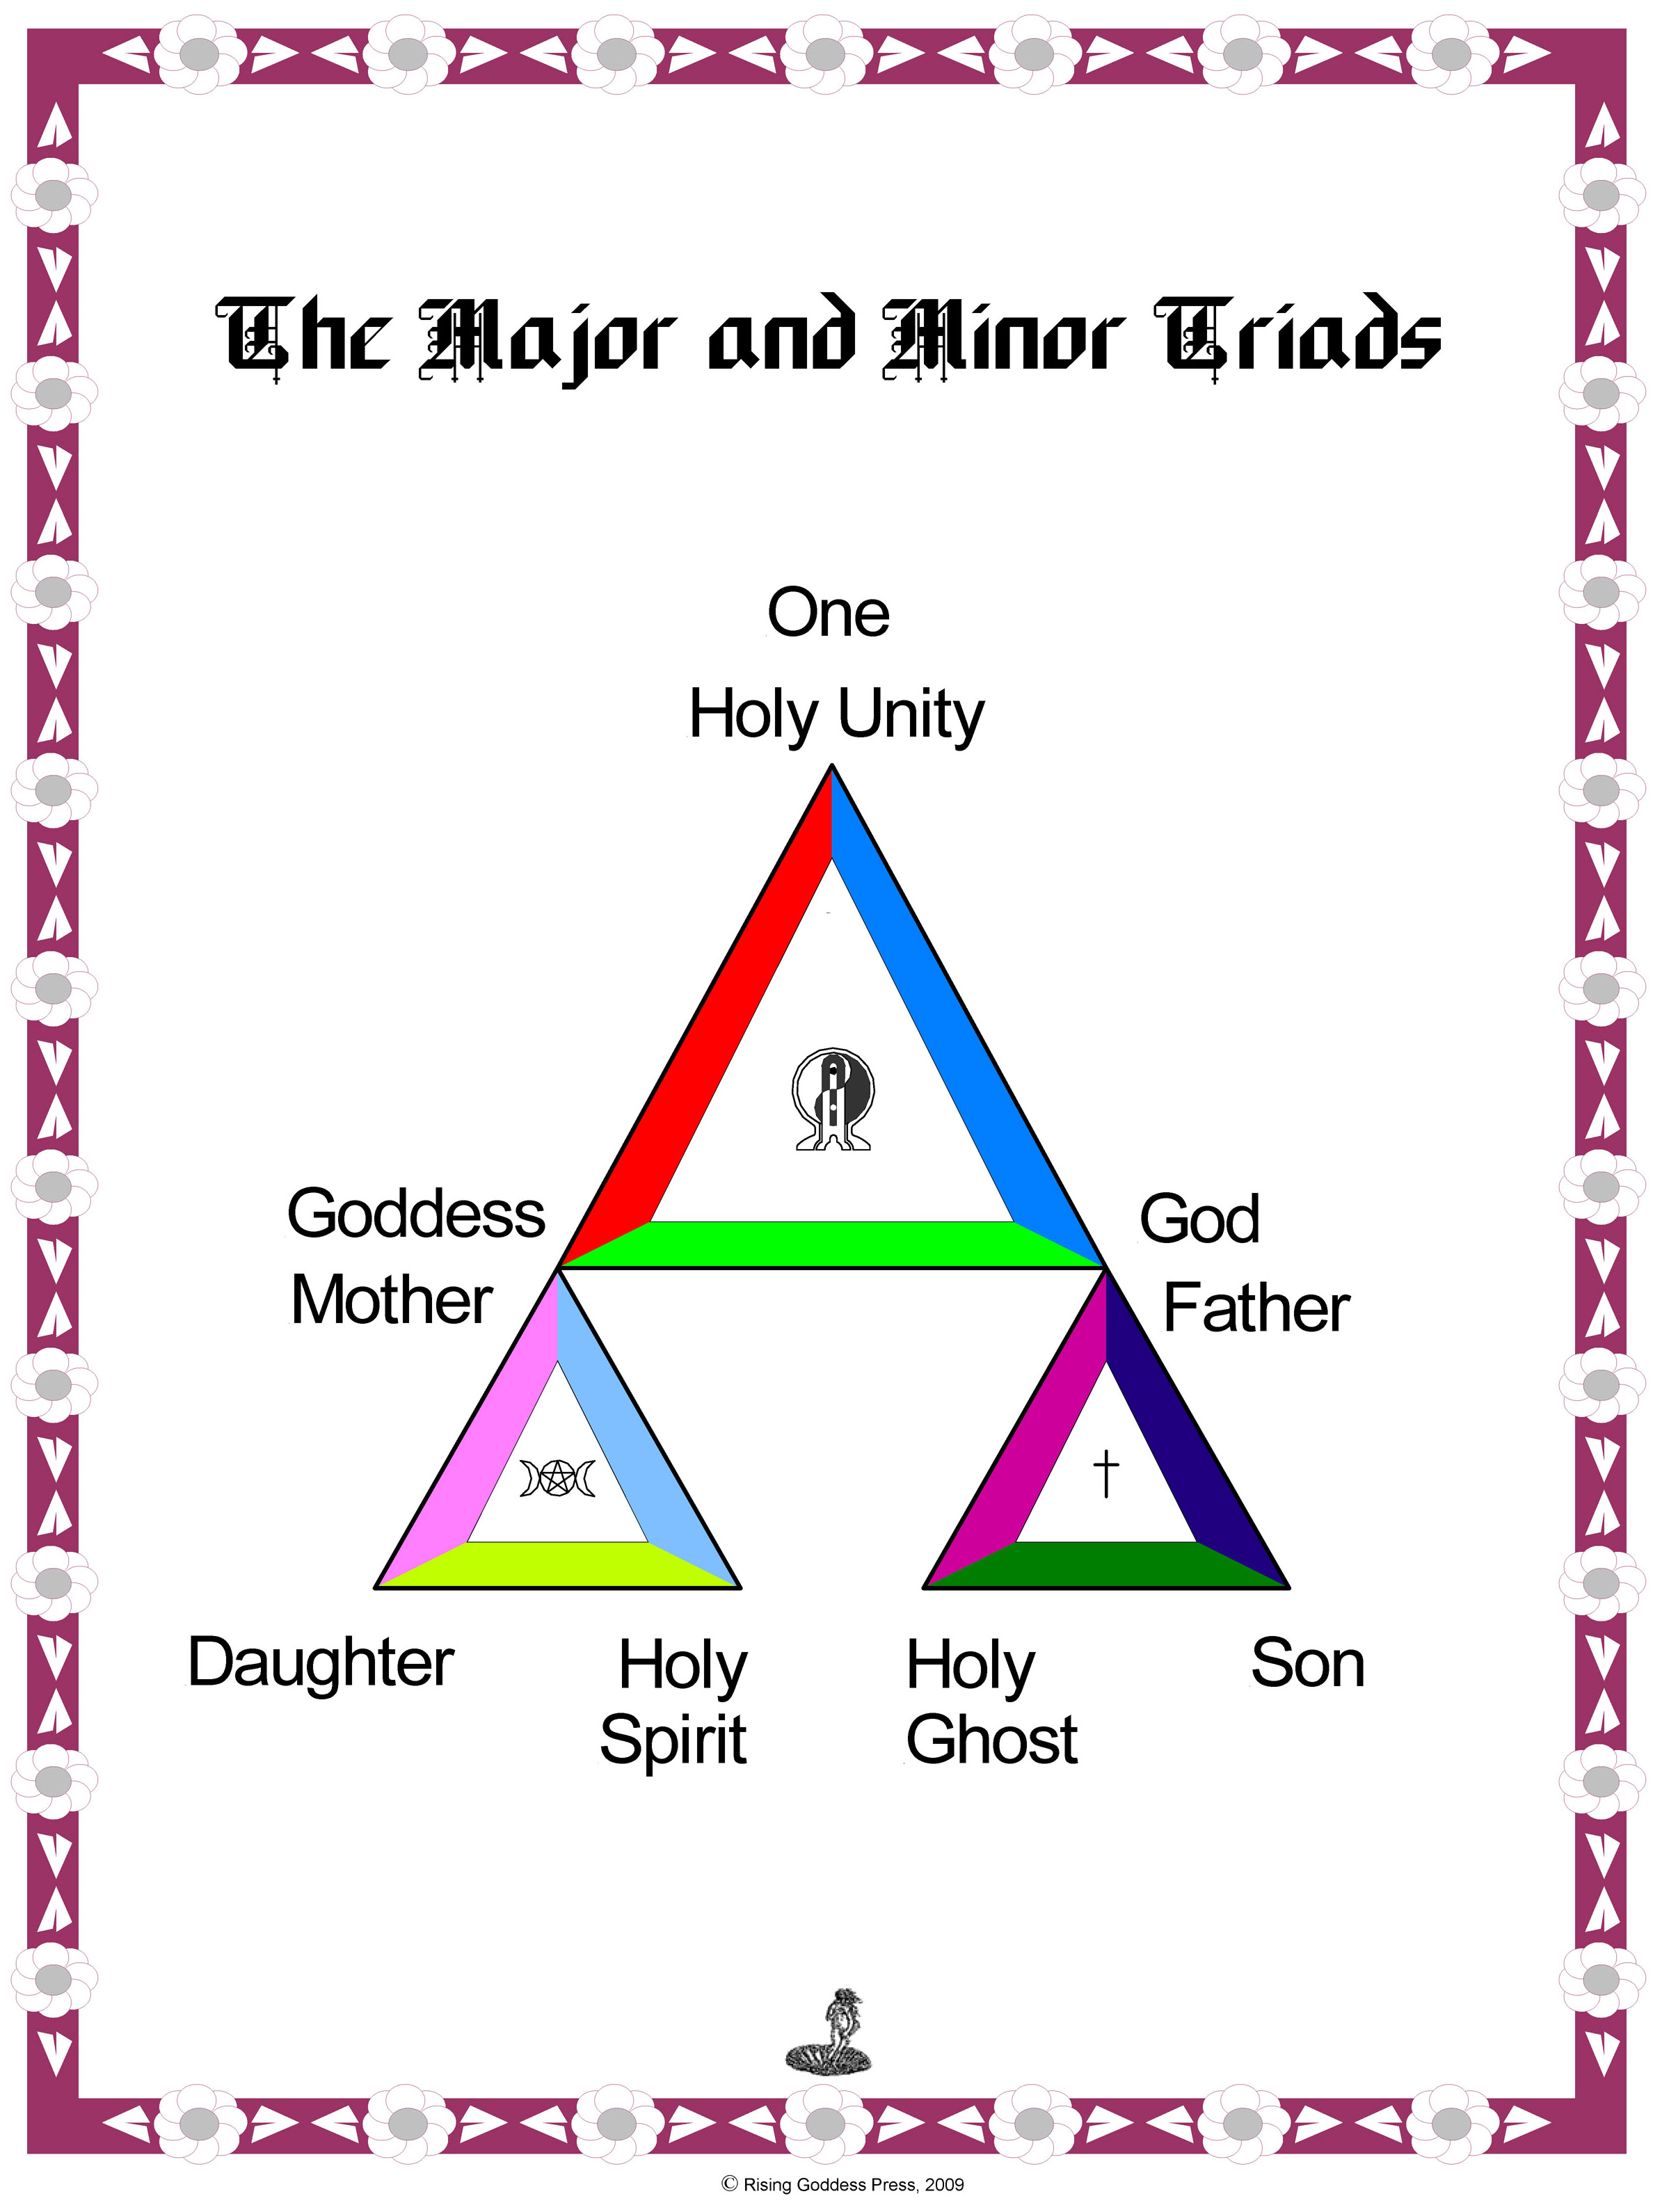 The Major and Minor Triads